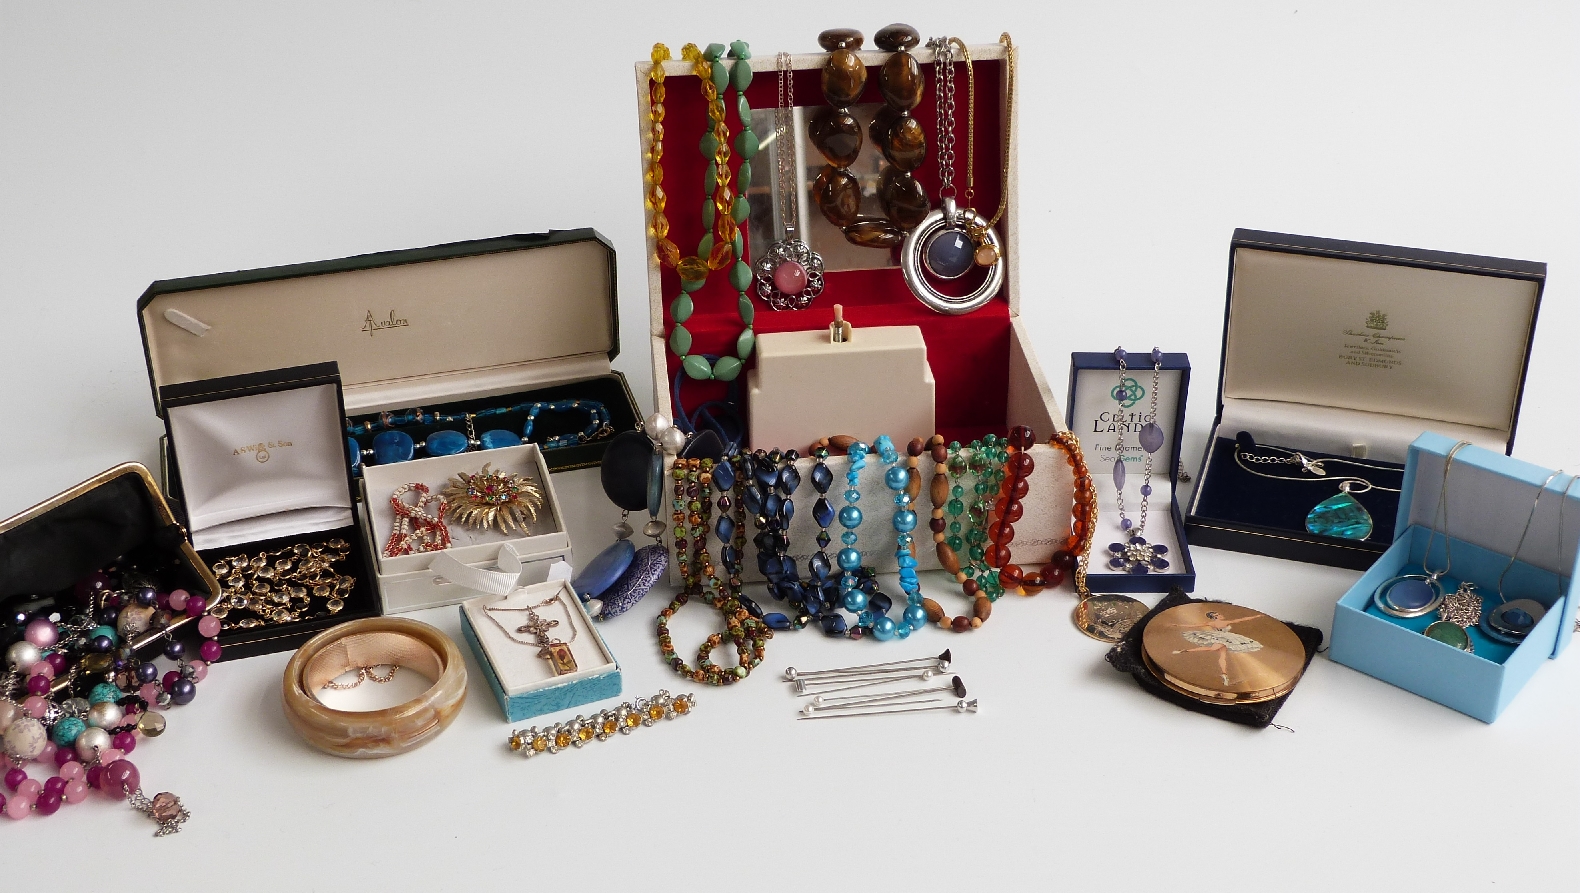 A collection of costume jewellery including a filigree brooch and necklace, two silver necklaces